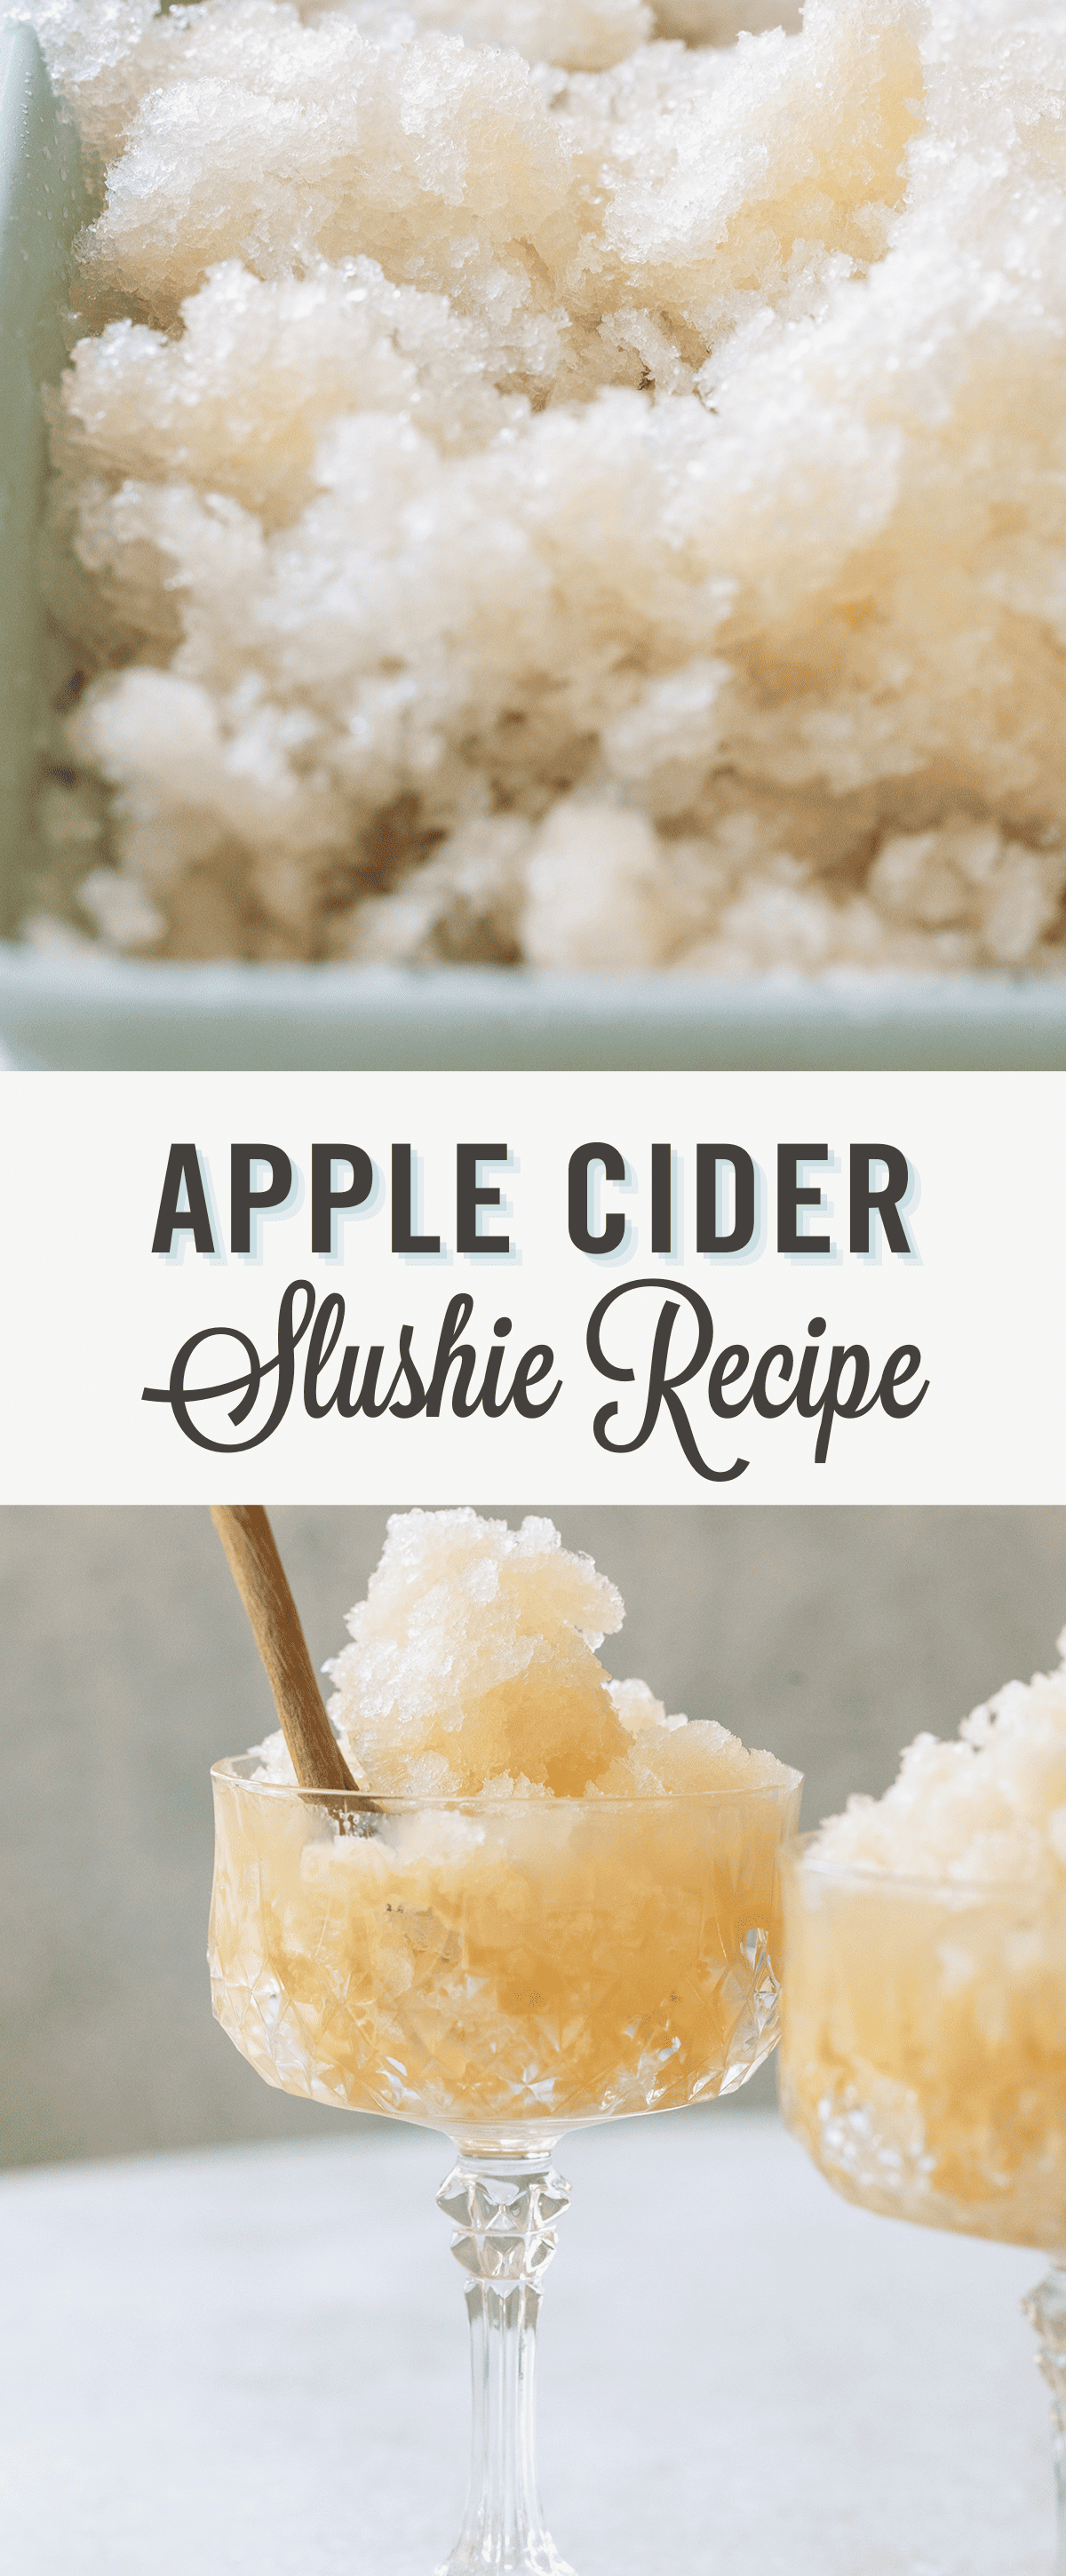 Apple cider slushie with title text.